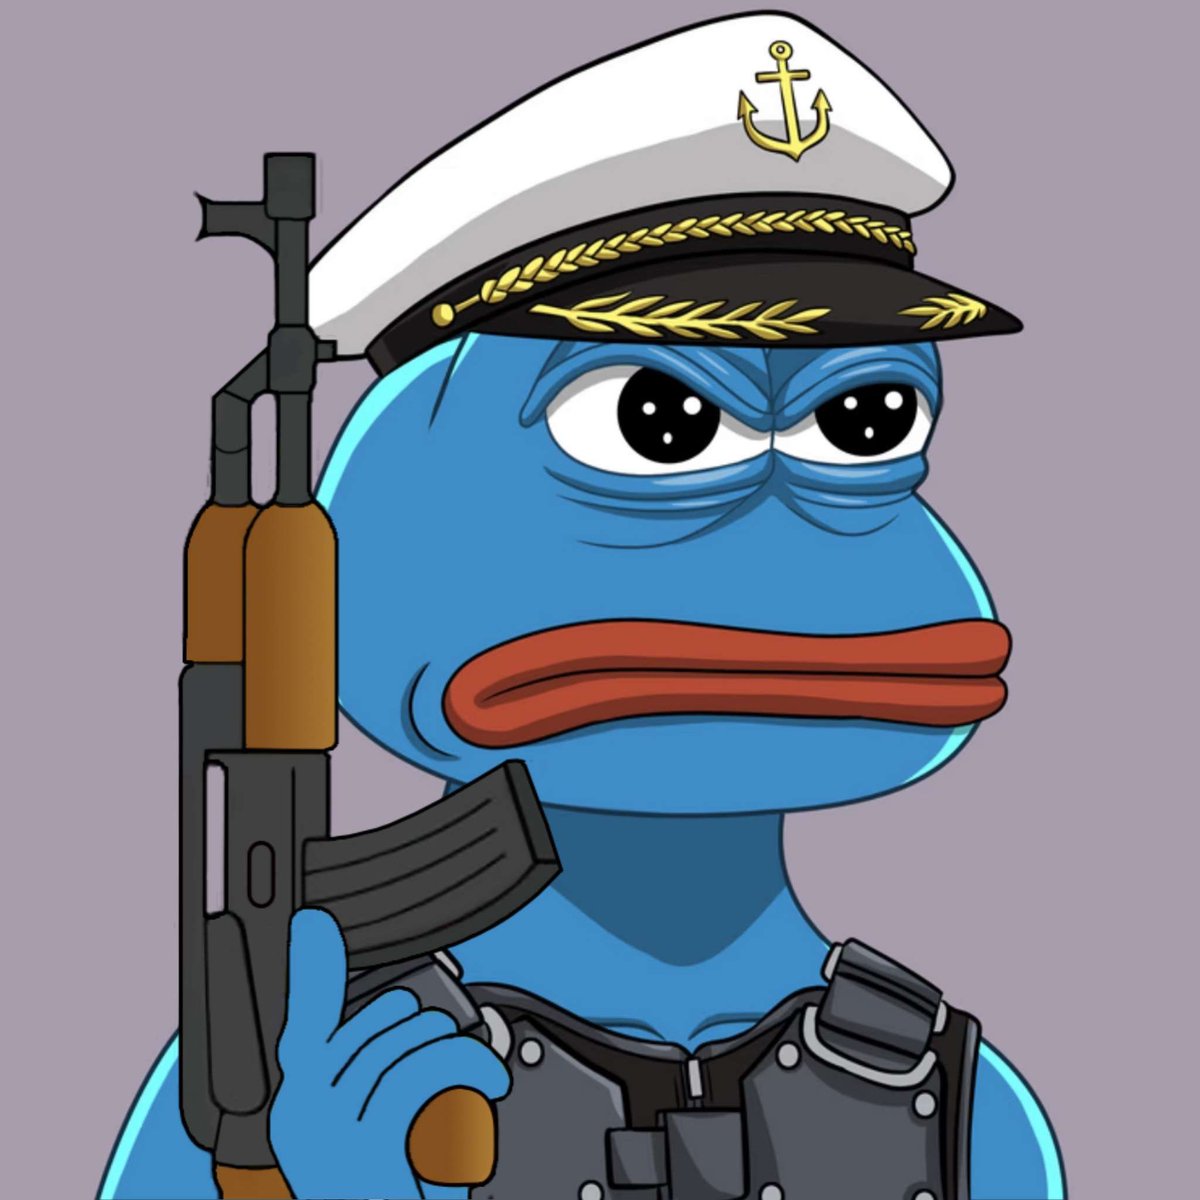 ⠀/／
🗣 Good morning, everyone♪
🗣 Look forward to the latest     
      announcement from #PAYC 🫶
   \＼

The STAKE & EARN is about to begin soon. 
Are you all ready?

Rare PEPEs are gradually appearing at the floor price!
I found a PEPE with parts I like, so I'm considering